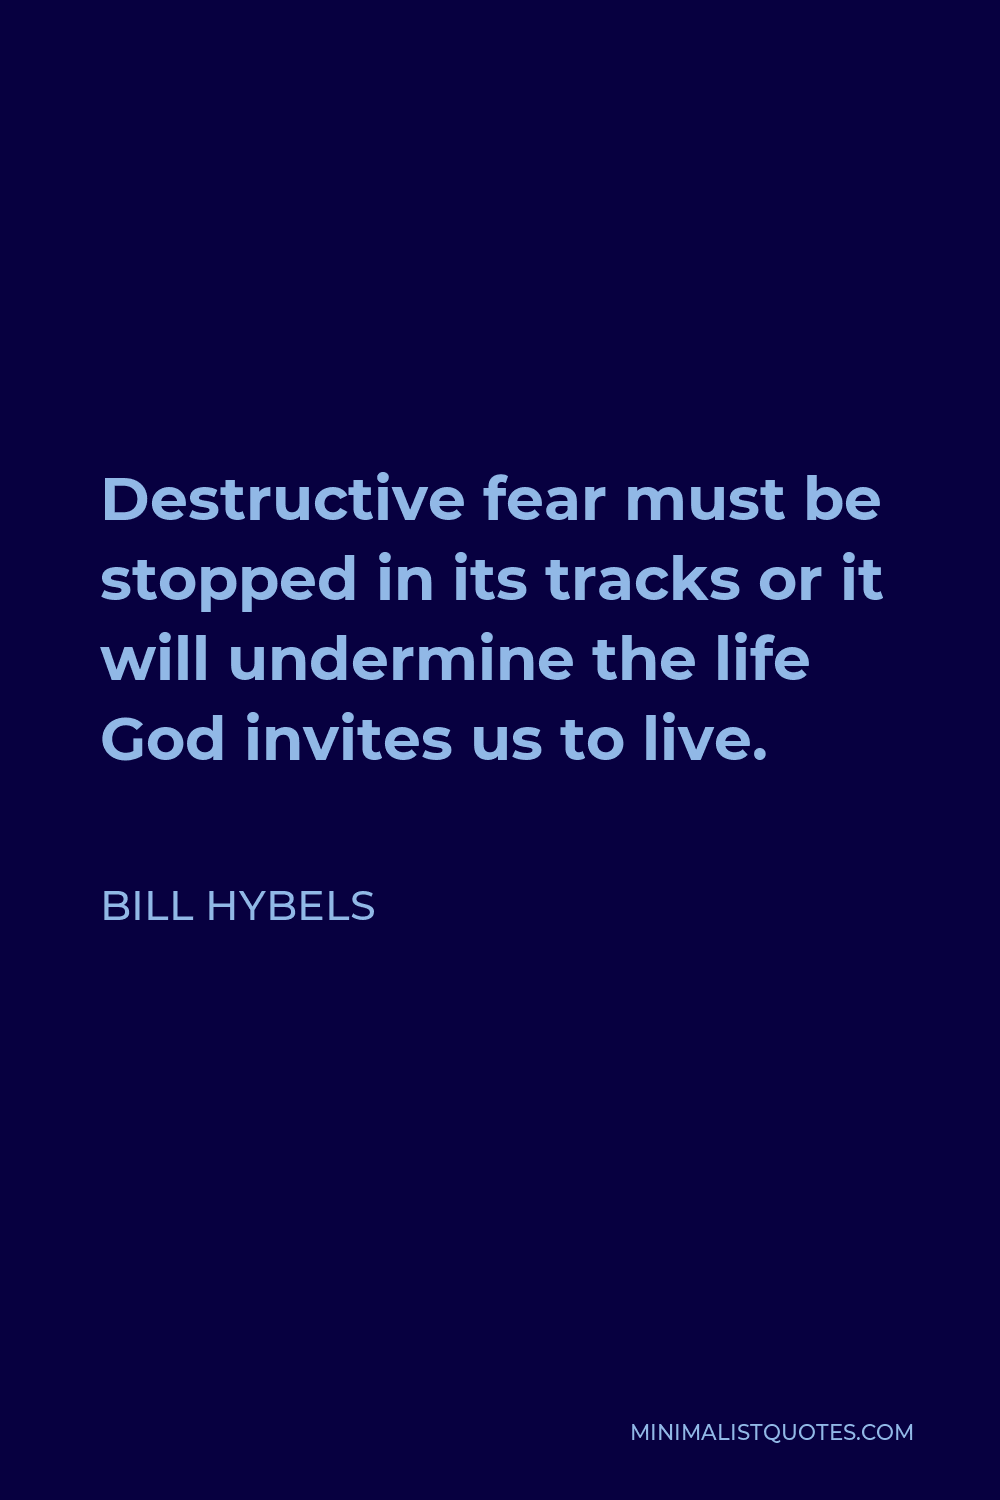 Bill Hybels Quote - Destructive fear must be stopped in its tracks or it will undermine the life God invites us to live.